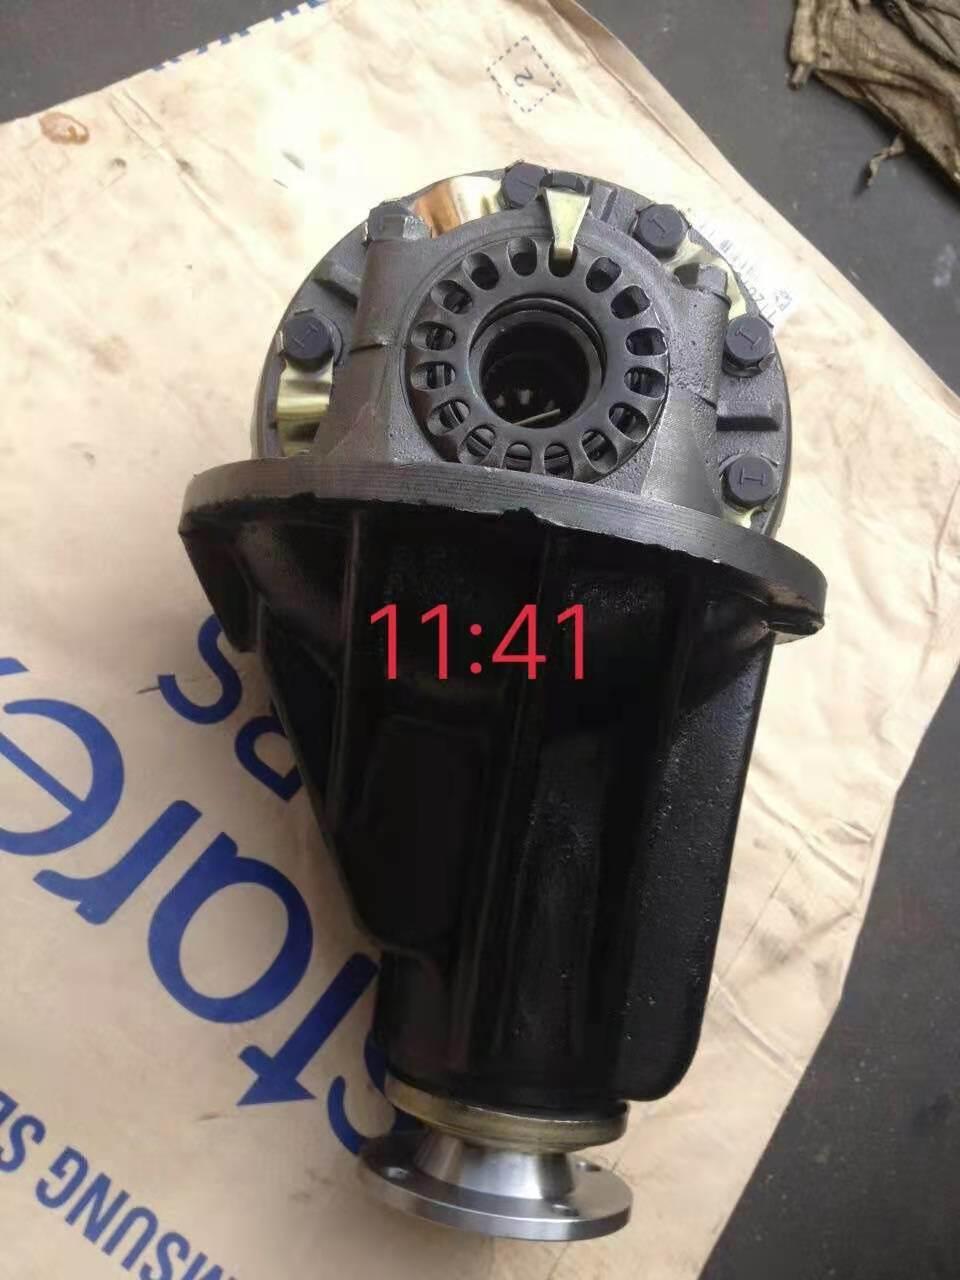 Differential for Toyota 22r, Hiace Ratio 4.55 (9: 41)